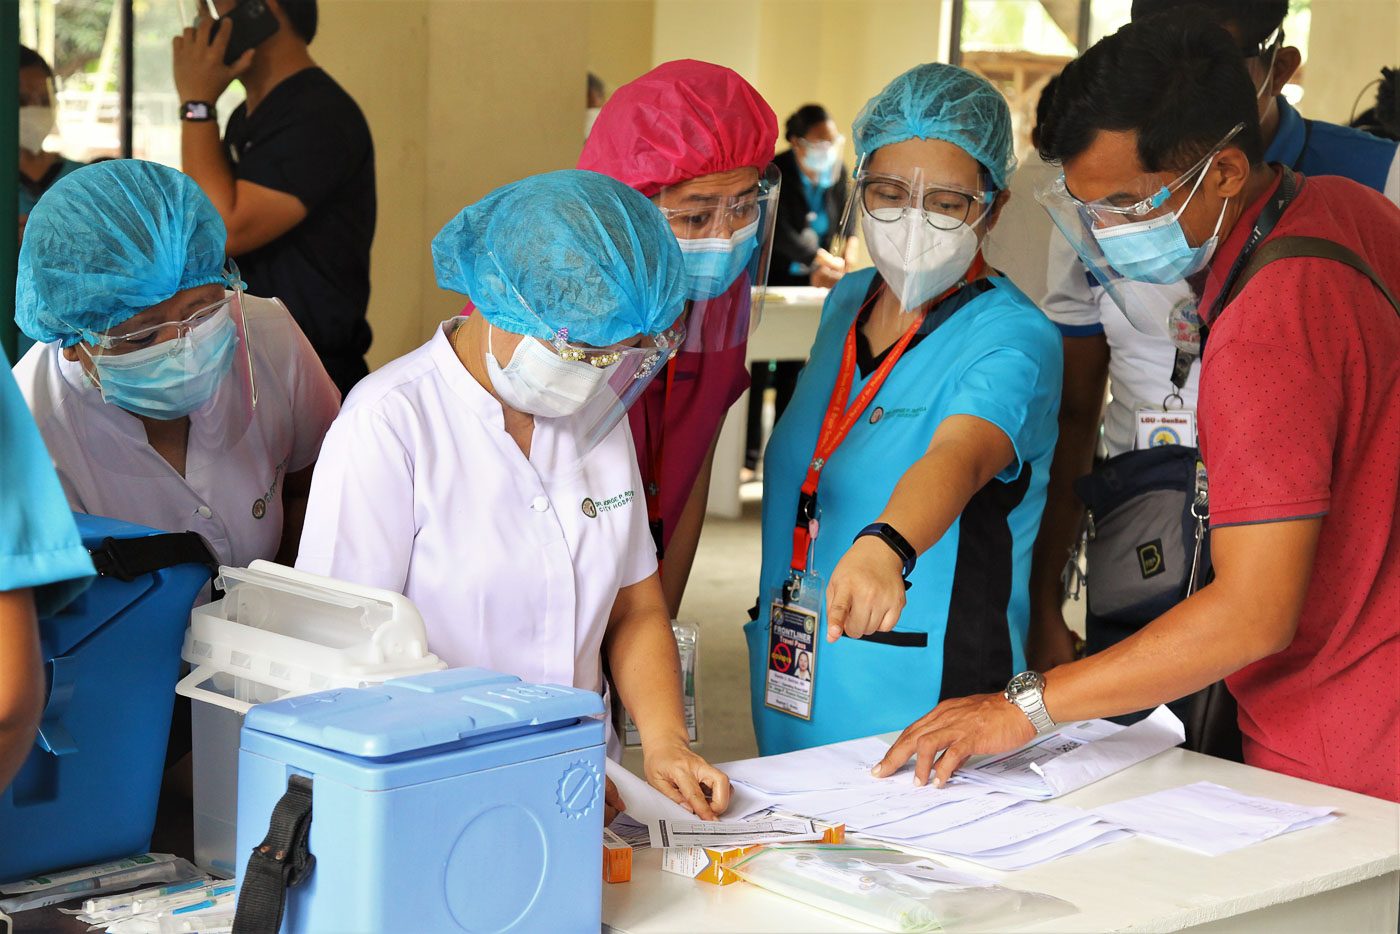 As General Santos hospitals get overwhelmed, workers make do with thinning supplies